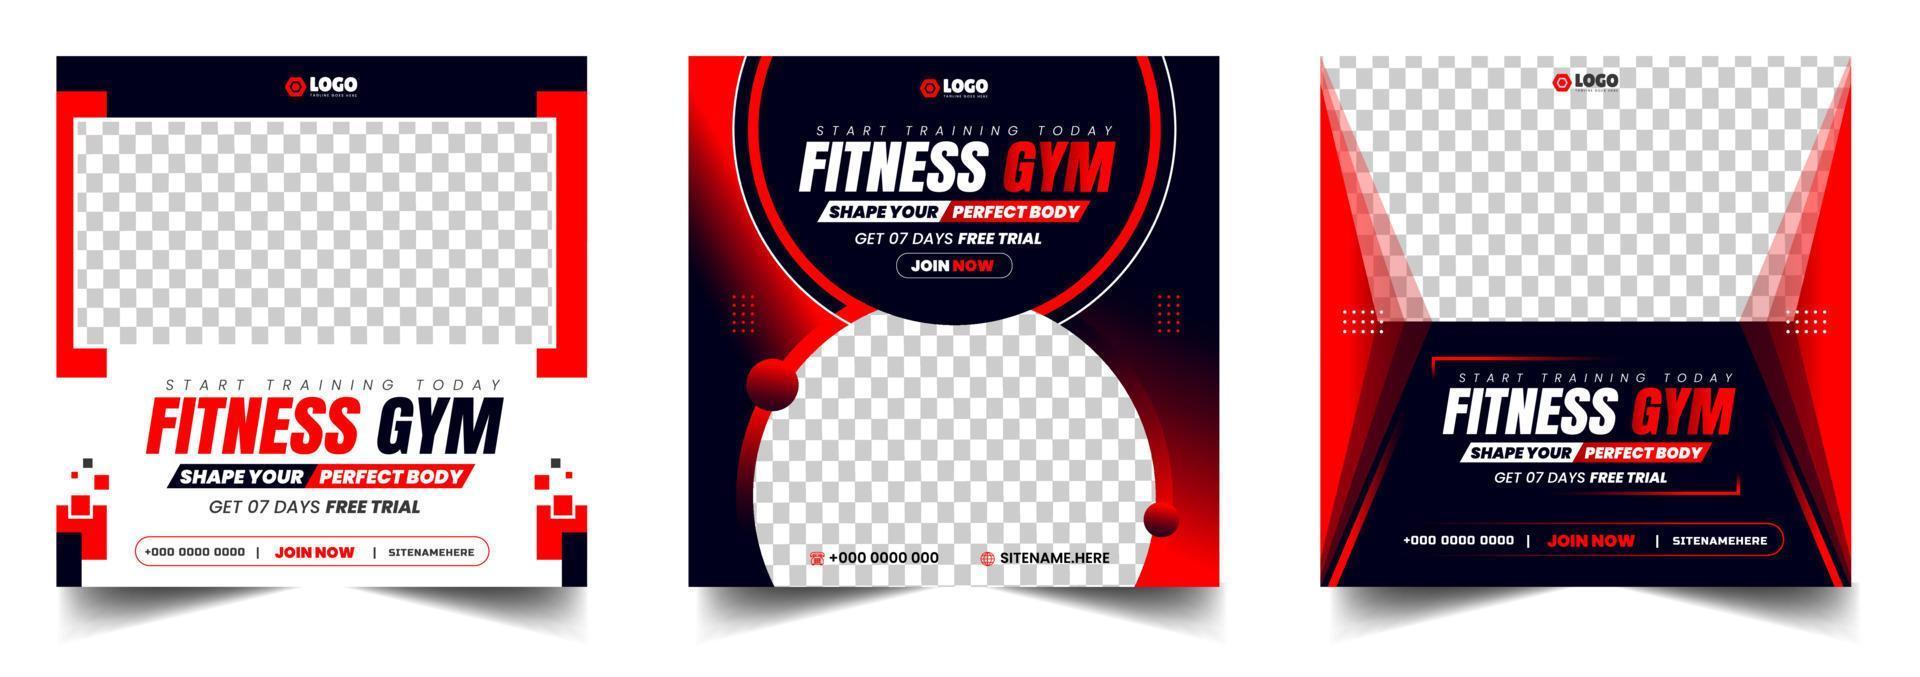 Fitness gym social media post banner template with black and red color, gym, Workout, fitness and Sports social media post banner, fitness gym social media post banner design. vector